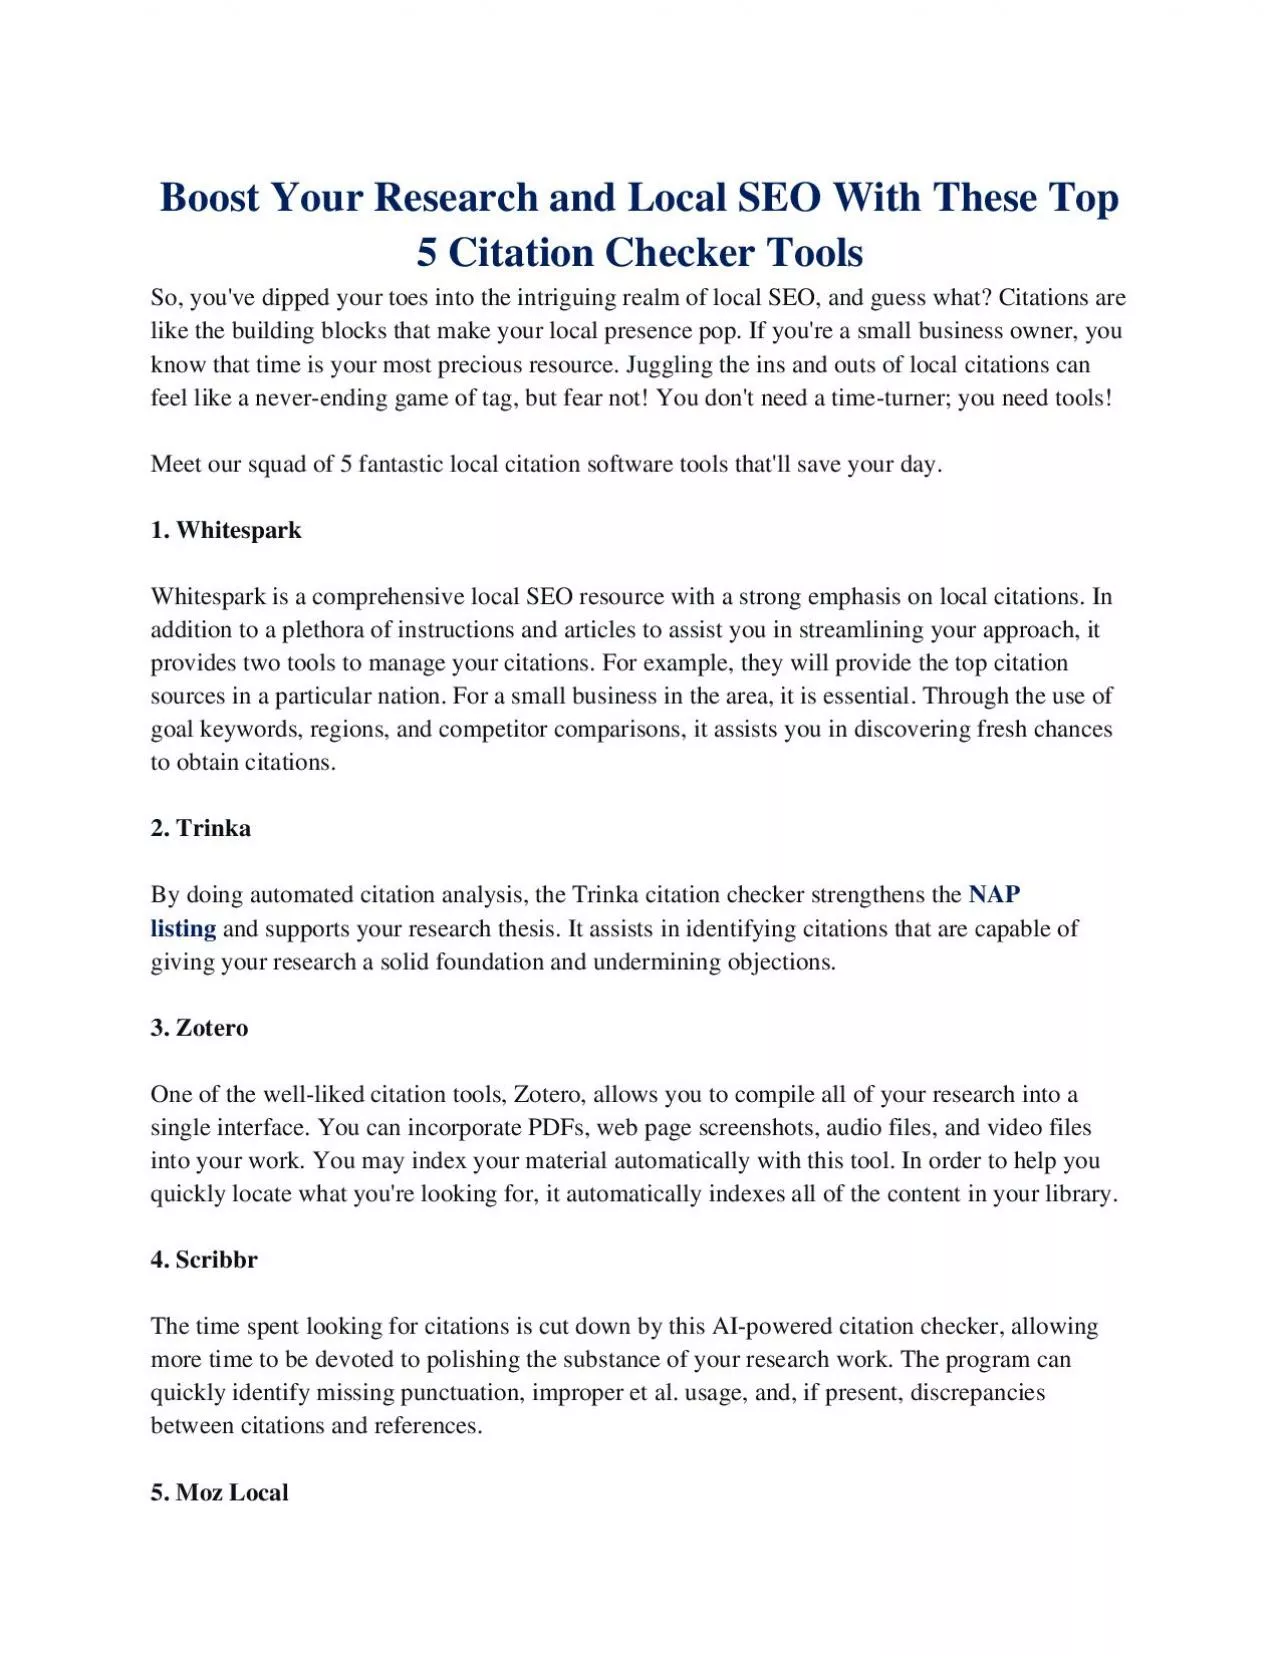 Boost Your Research and Local SEO With These Top 5 Citation Checker Tools